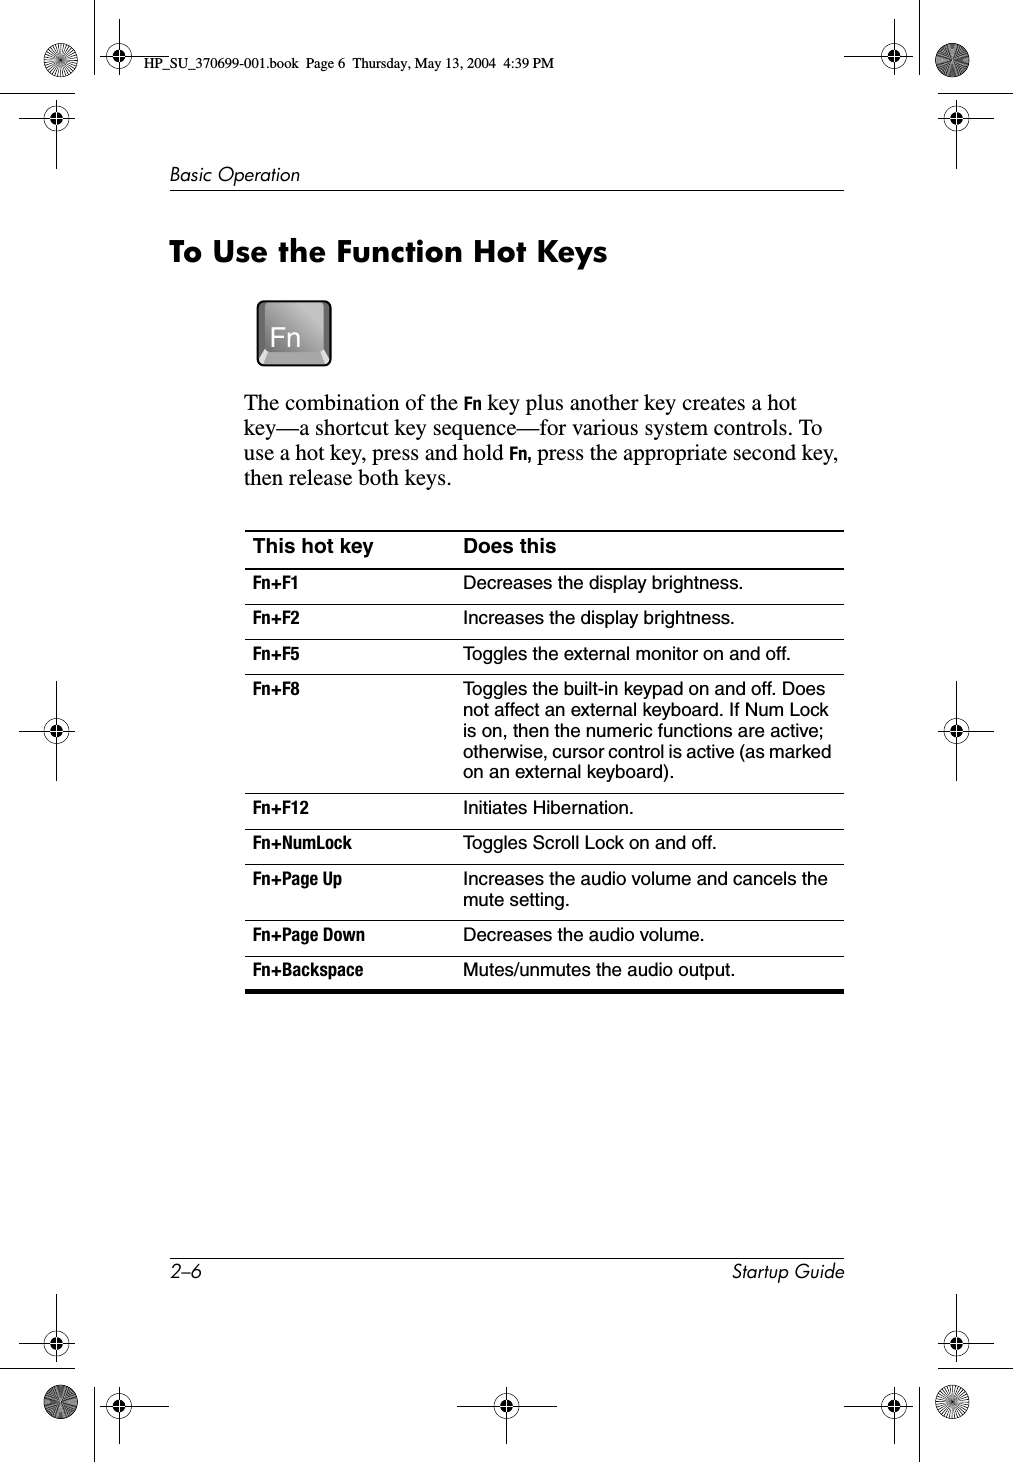 2–6 Startup GuideBasic OperationTo Use the Function Hot KeysThe combination of the Fn key plus another key creates a hot key—a shortcut key sequence—for various system controls. To use a hot key, press and hold Fn, press the appropriate second key, then release both keys. This hot key Does thisFn+F1 Decreases the display brightness.Fn+F2 Increases the display brightness.Fn+F5 Toggles the external monitor on and off.Fn+F8 Toggles the built-in keypad on and off. Does not affect an external keyboard. If Num Lock is on, then the numeric functions are active; otherwise, cursor control is active (as marked on an external keyboard).Fn+F12 Initiates Hibernation.Fn+NumLock Toggles Scroll Lock on and off.Fn+Page Up Increases the audio volume and cancels the mute setting.Fn+Page Down Decreases the audio volume.Fn+Backspace Mutes/unmutes the audio output.FnHP_SU_370699-001.book  Page 6  Thursday, May 13, 2004  4:39 PM